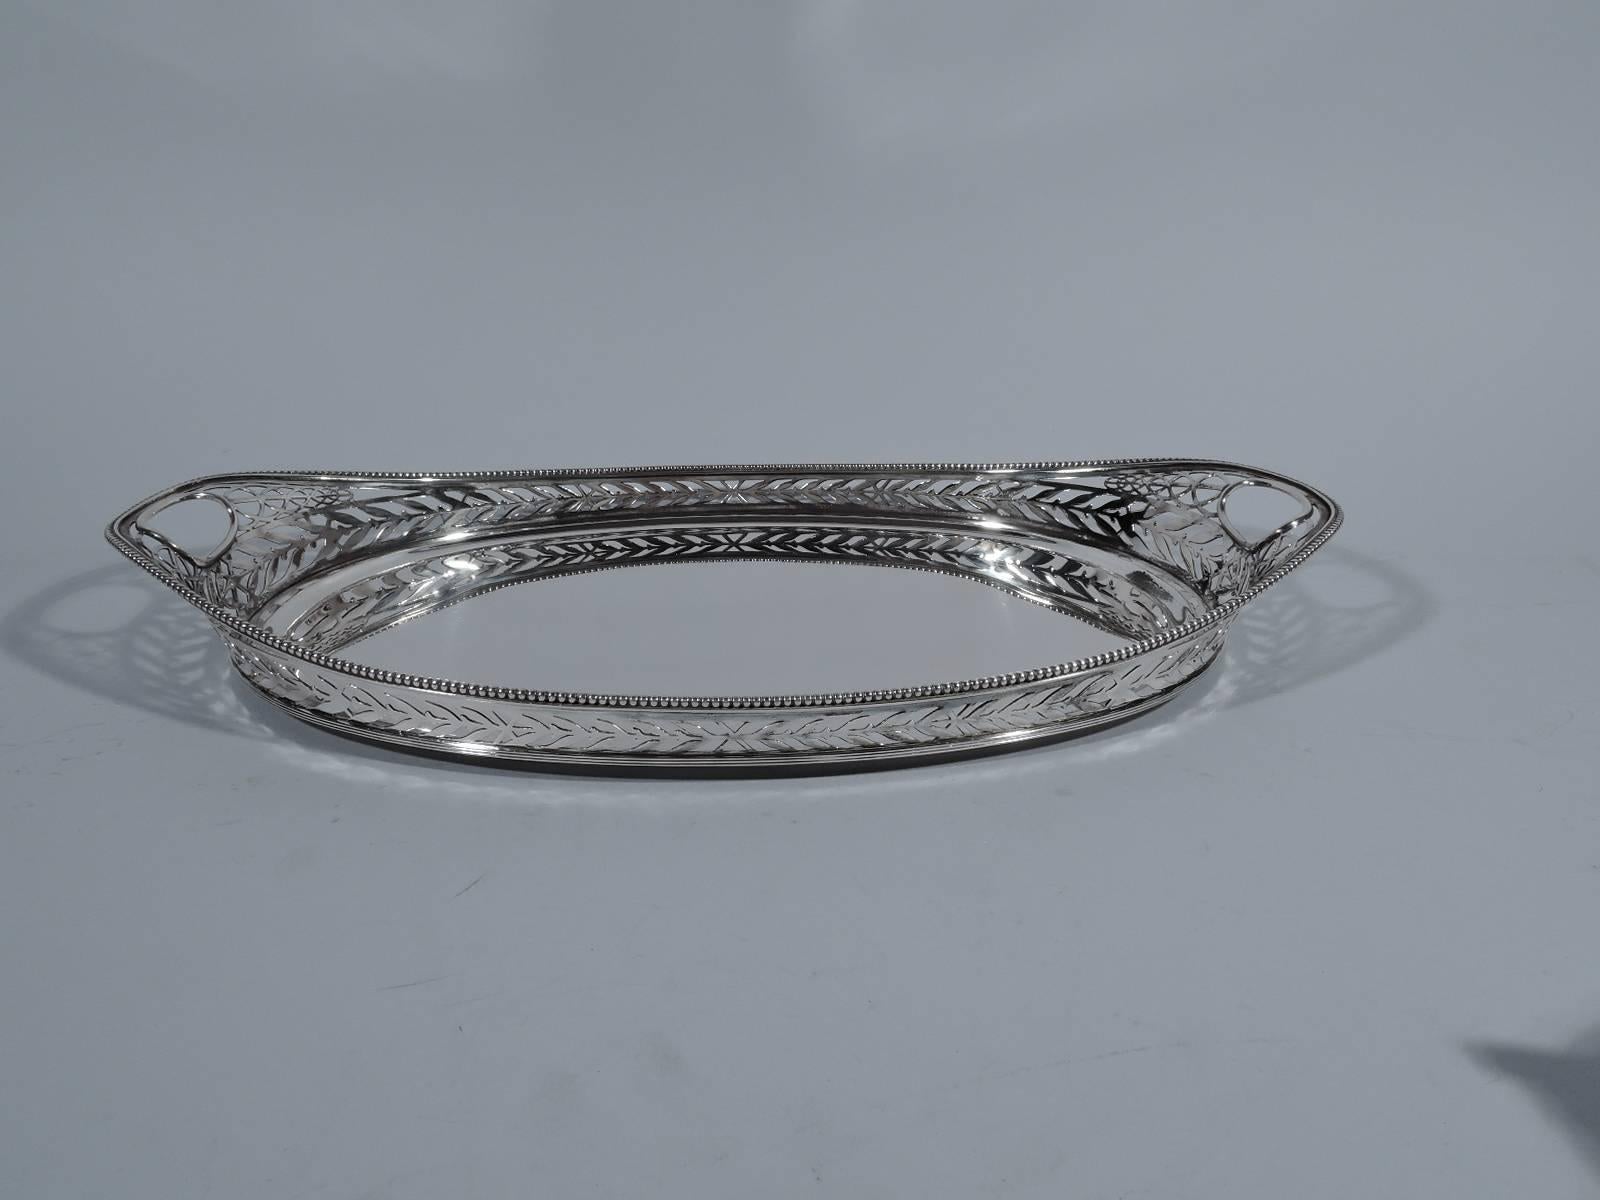 Dutch 833 silver tray, 1912. Oval well and asymmetrical gallery with pierced imbricated leaves and ovals and beaded rim. Cutout oval end handles. A pretty and characteristic piece from the early 20th century. Hallmark includes date letter. Weight: